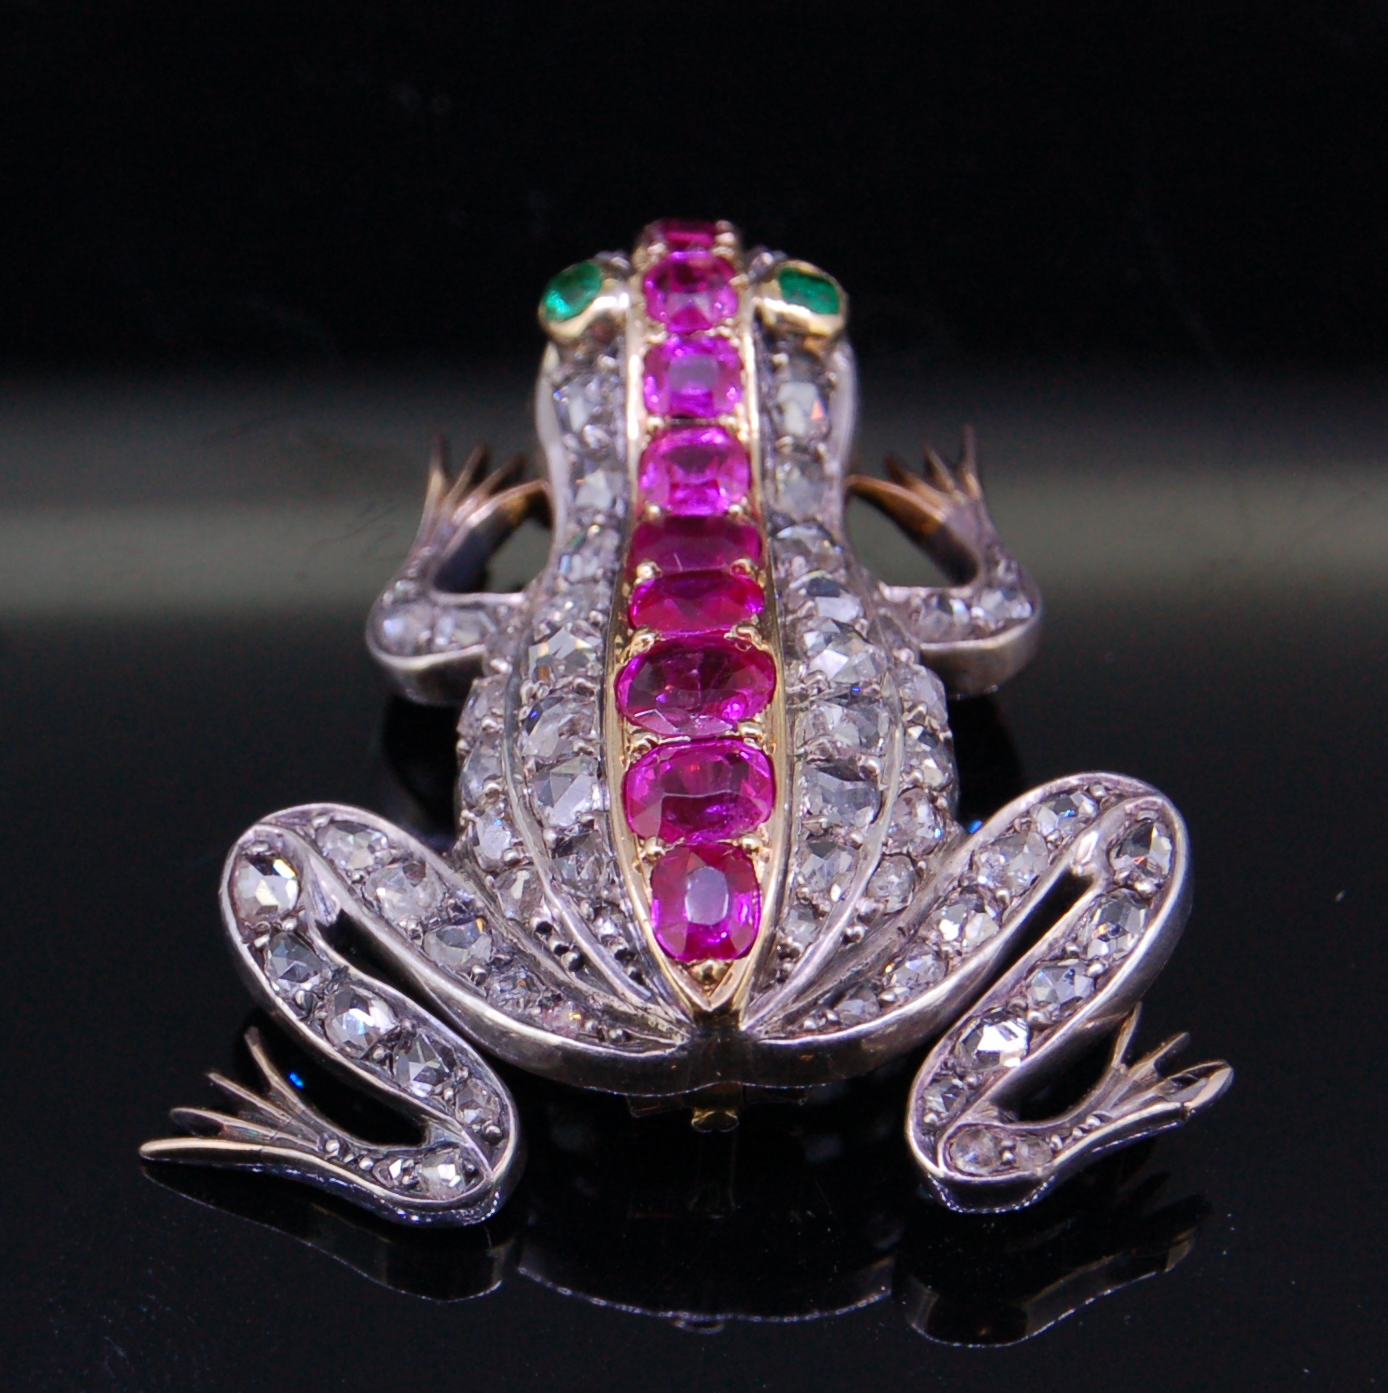 ANTIQUE DIAMOND RUBY AND EMERALD FROG BROOCH